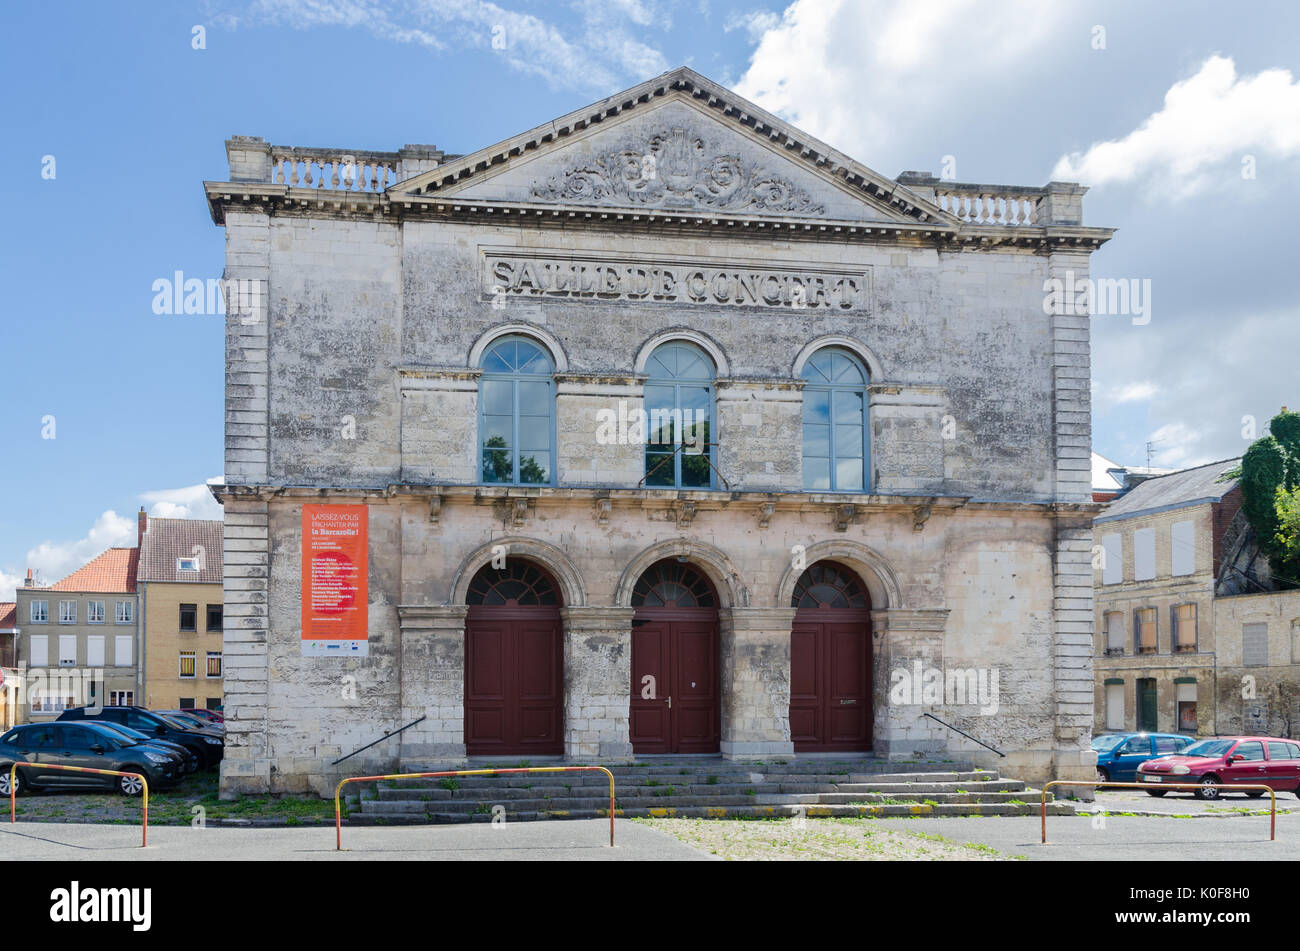 The old Salle de Concert or Concert Hall in Place Saint-Jean, Saint Omer, Northern France Stock Photo